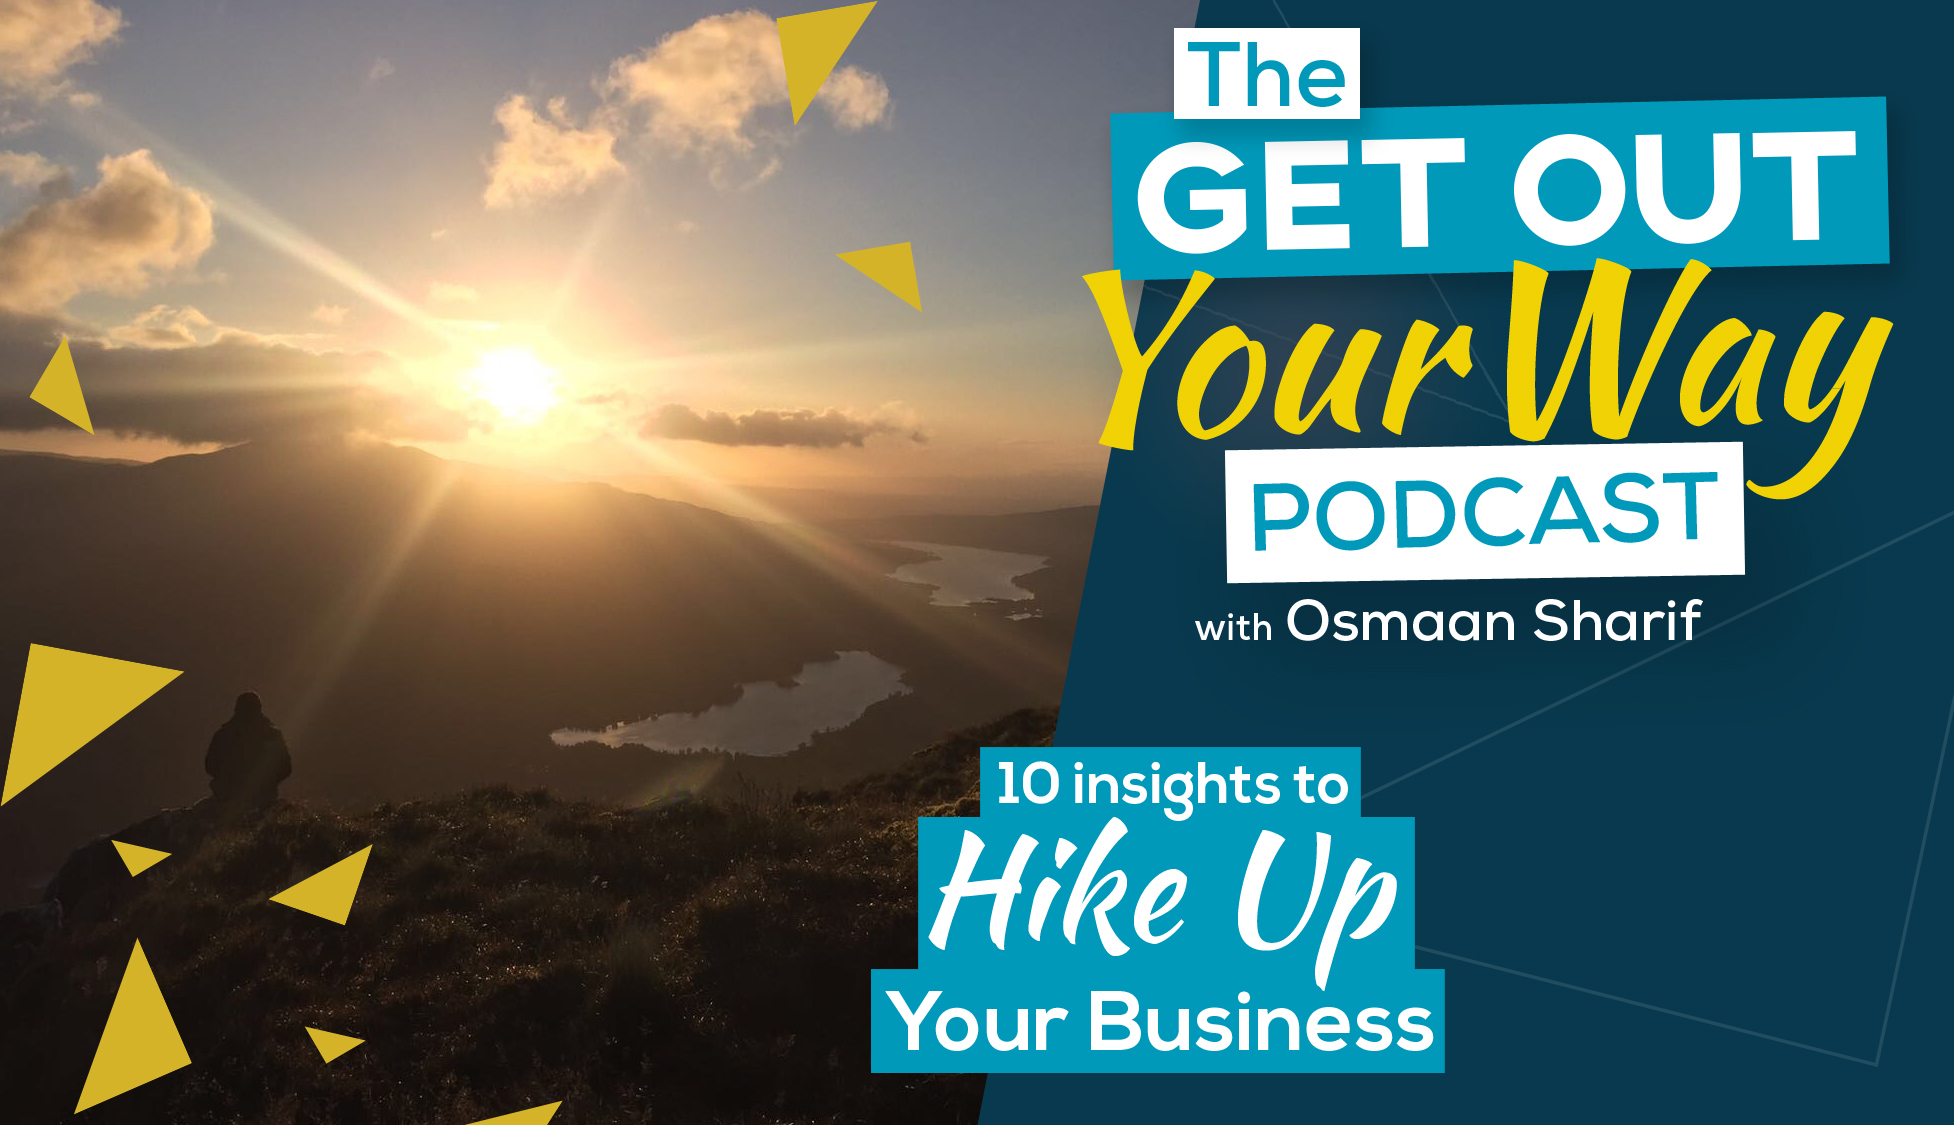 10 insights to hike up your business